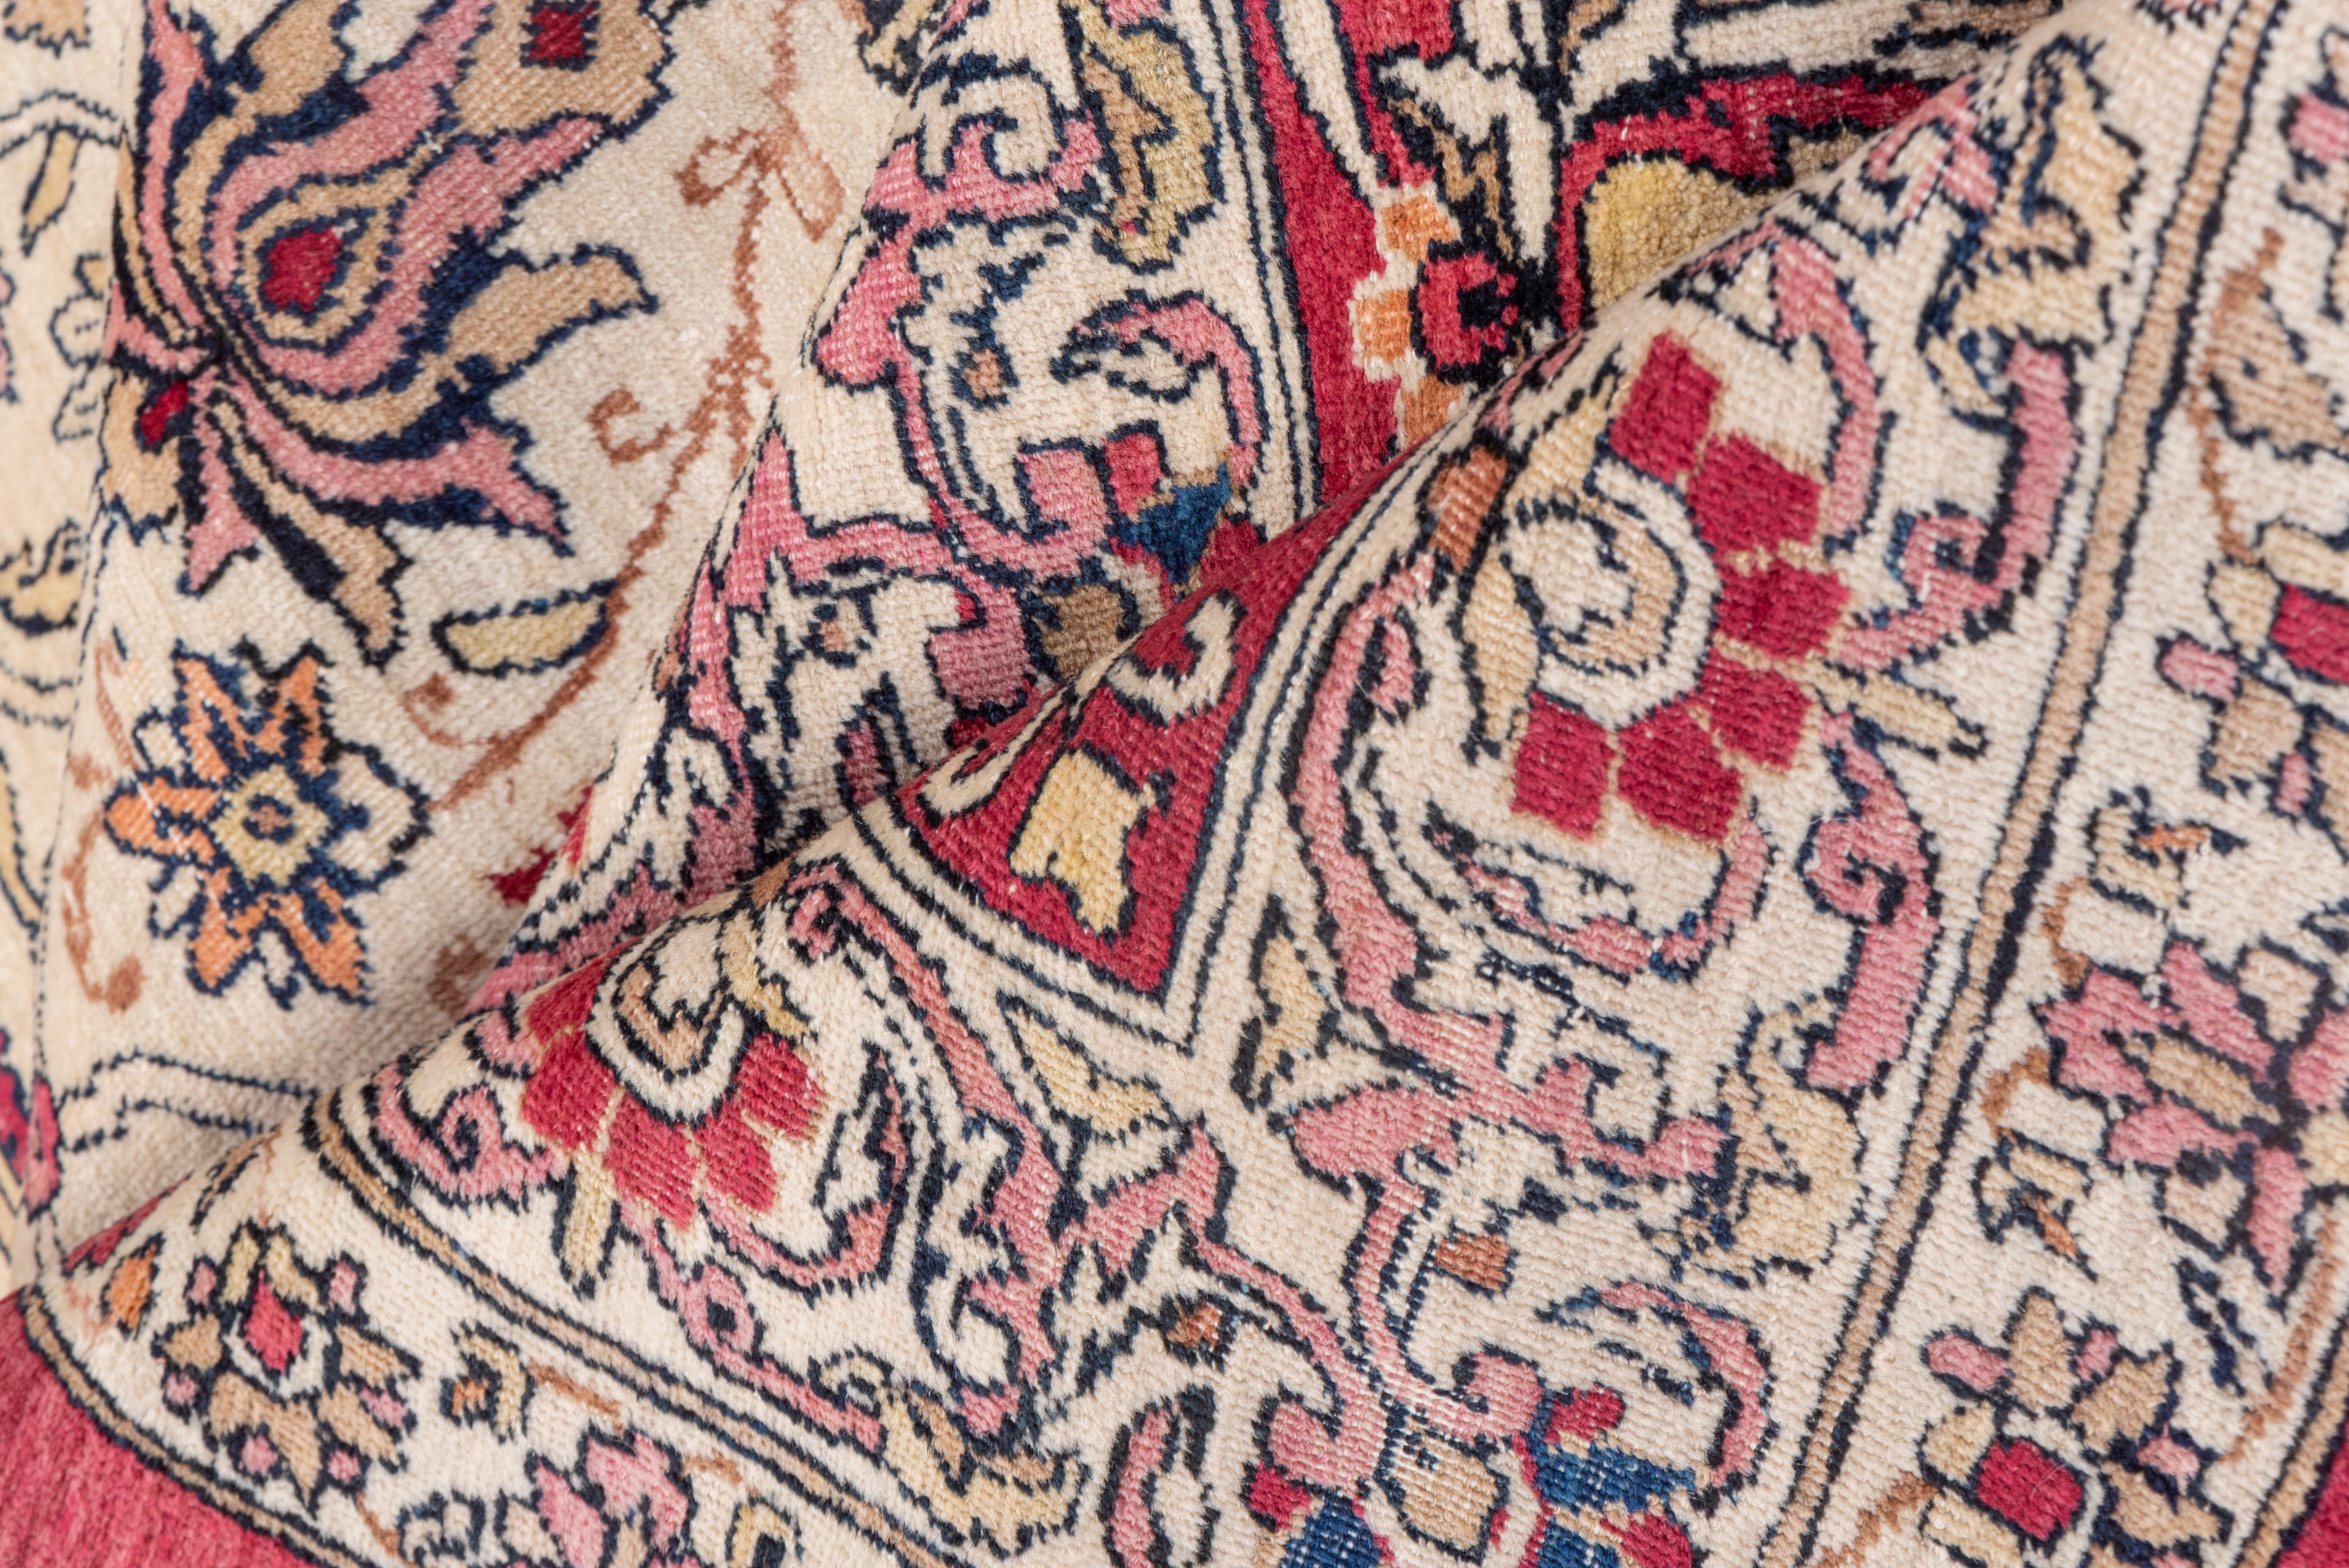 Antique Persian Lavar Kerman Carpet, Ecru All-Over Field, Red Pink Borders In Good Condition For Sale In New York, NY